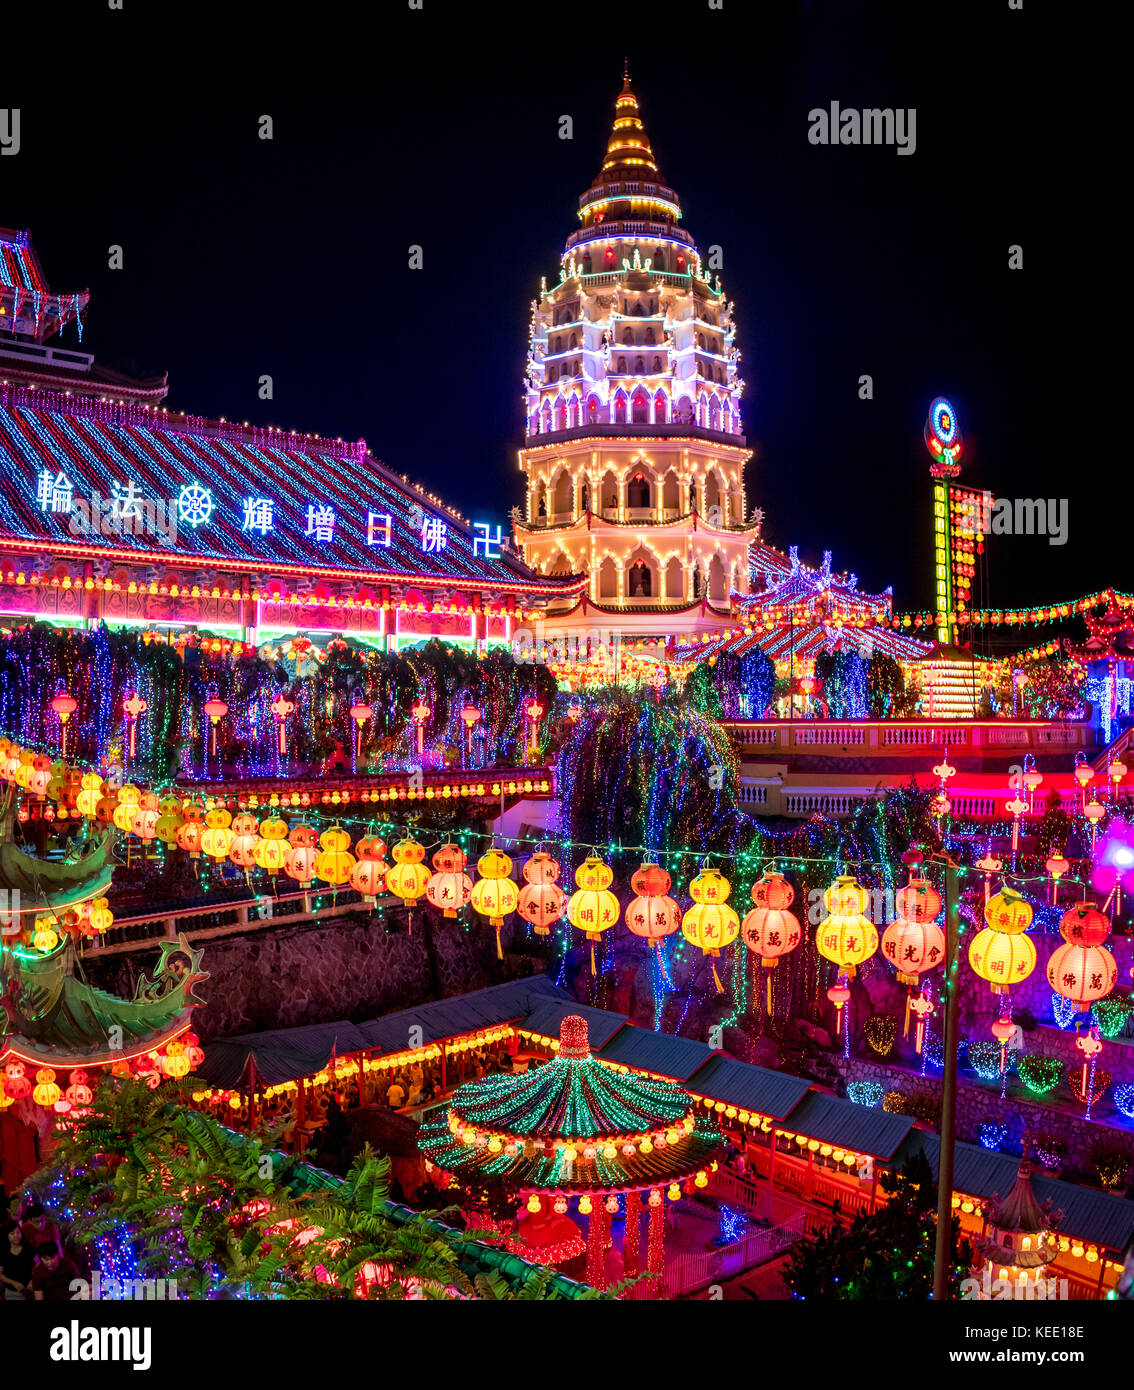 Kek Lok Si temple light up in Penang during the Chinese New Year Stock Photo -